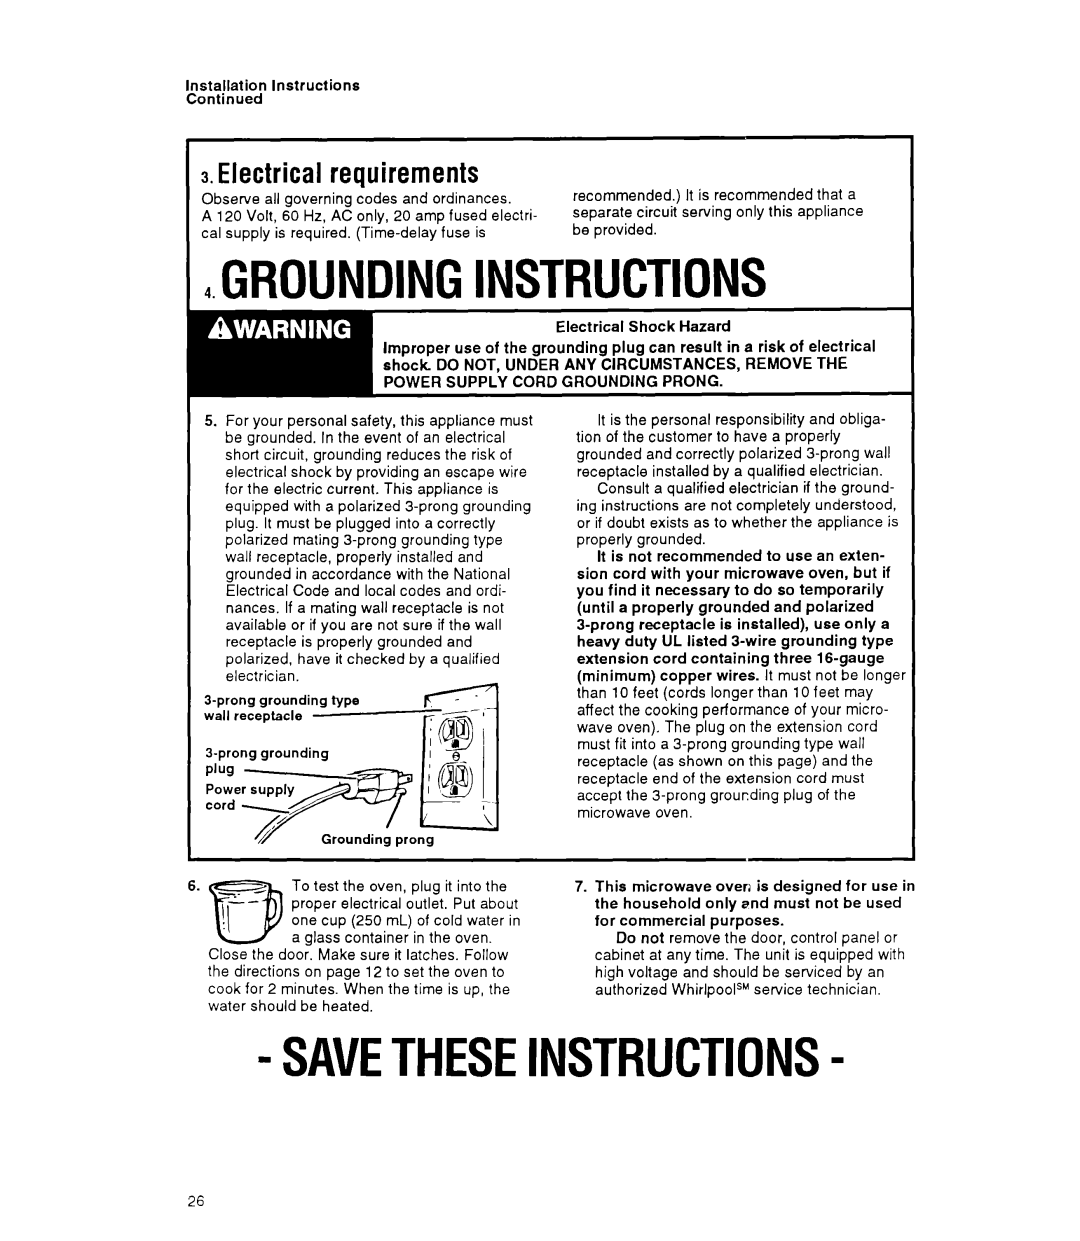 Whirlpool MT9160XY manual GROUNDlNGINSTRUCTIONS, Savetheseinstructions, Electrical requirements 